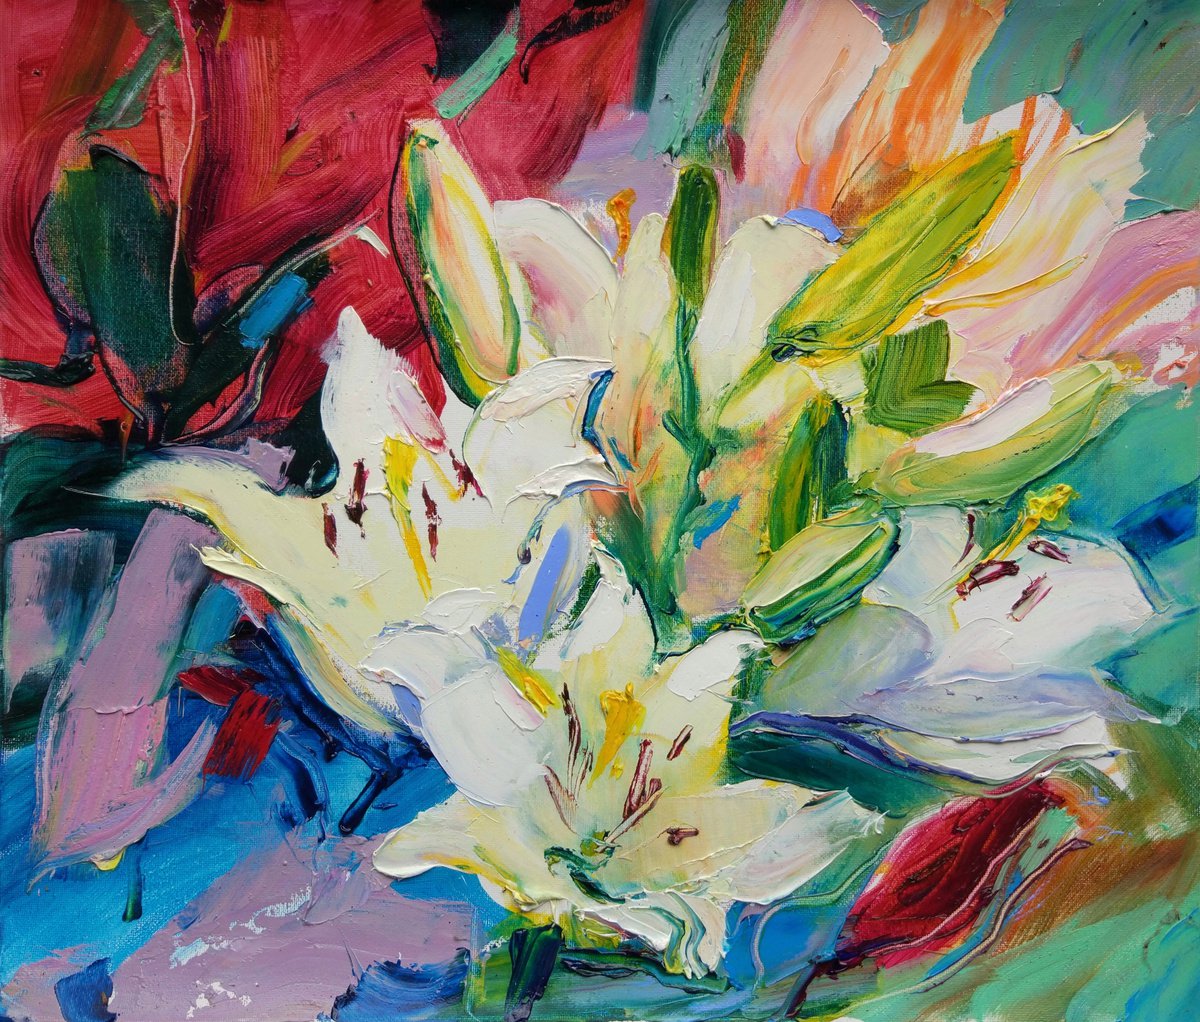 Expressive lilies. Summer sketches. Original plein air oil painting by Helen Shukina